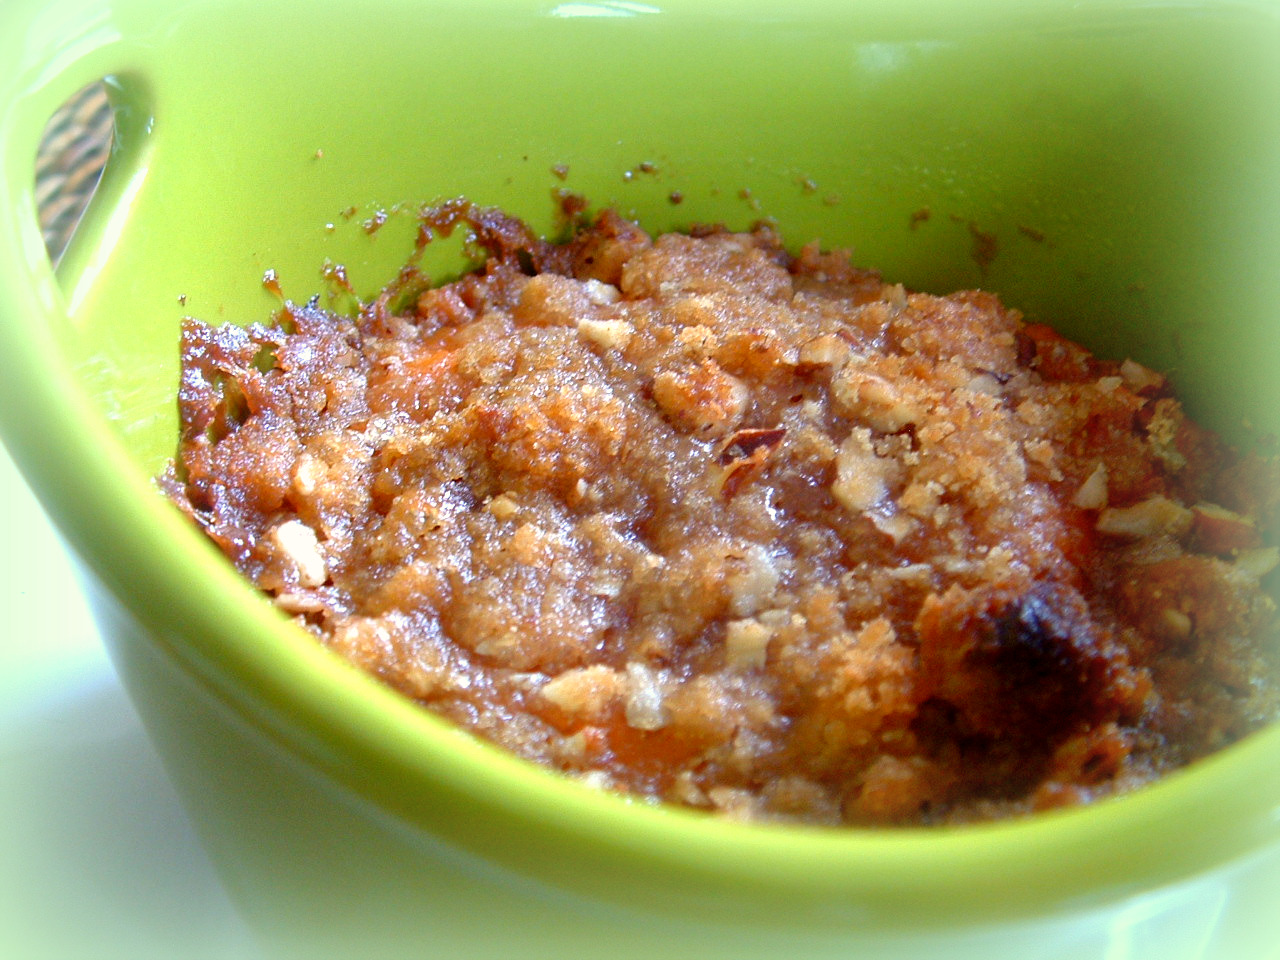 The Pioneer Woman's Sweet Potato Casserole or is it a Dessert Crisp? You be the judge…